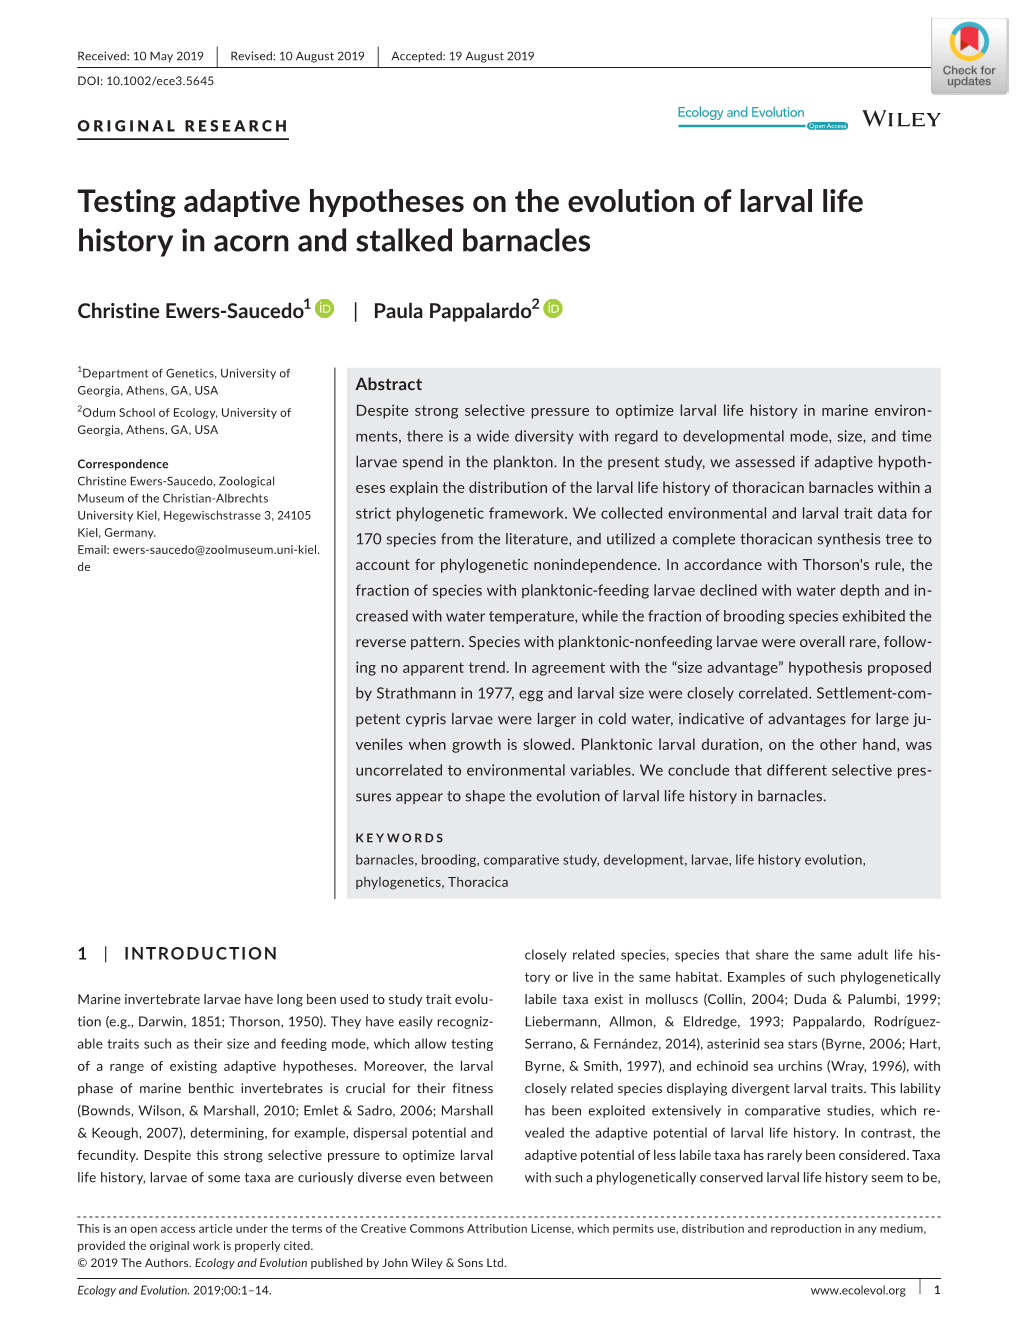 Testing Adaptive Hypotheses on the Evolution of Larval Life History in Acorn and Stalked Barnacles